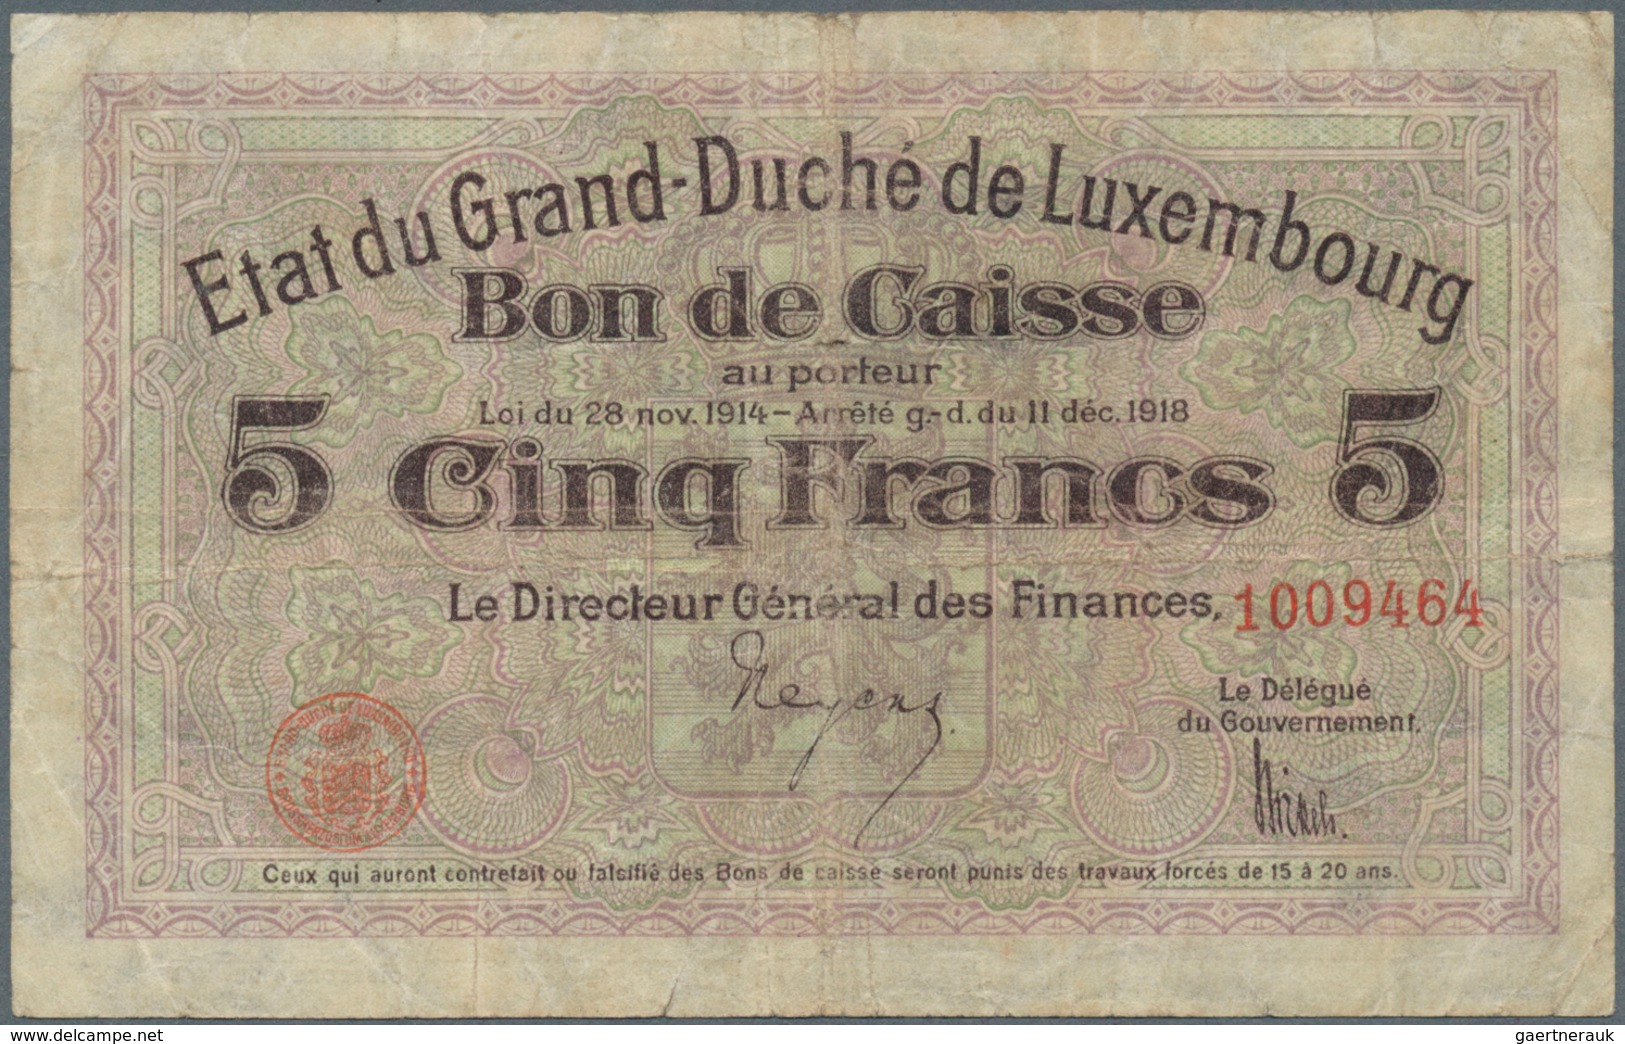 01937 Luxembourg: Very Nice Set With 5 Banknotes Comprising 2 X 5 Francs = 4 Mark With Signature Title: "L - Lussemburgo